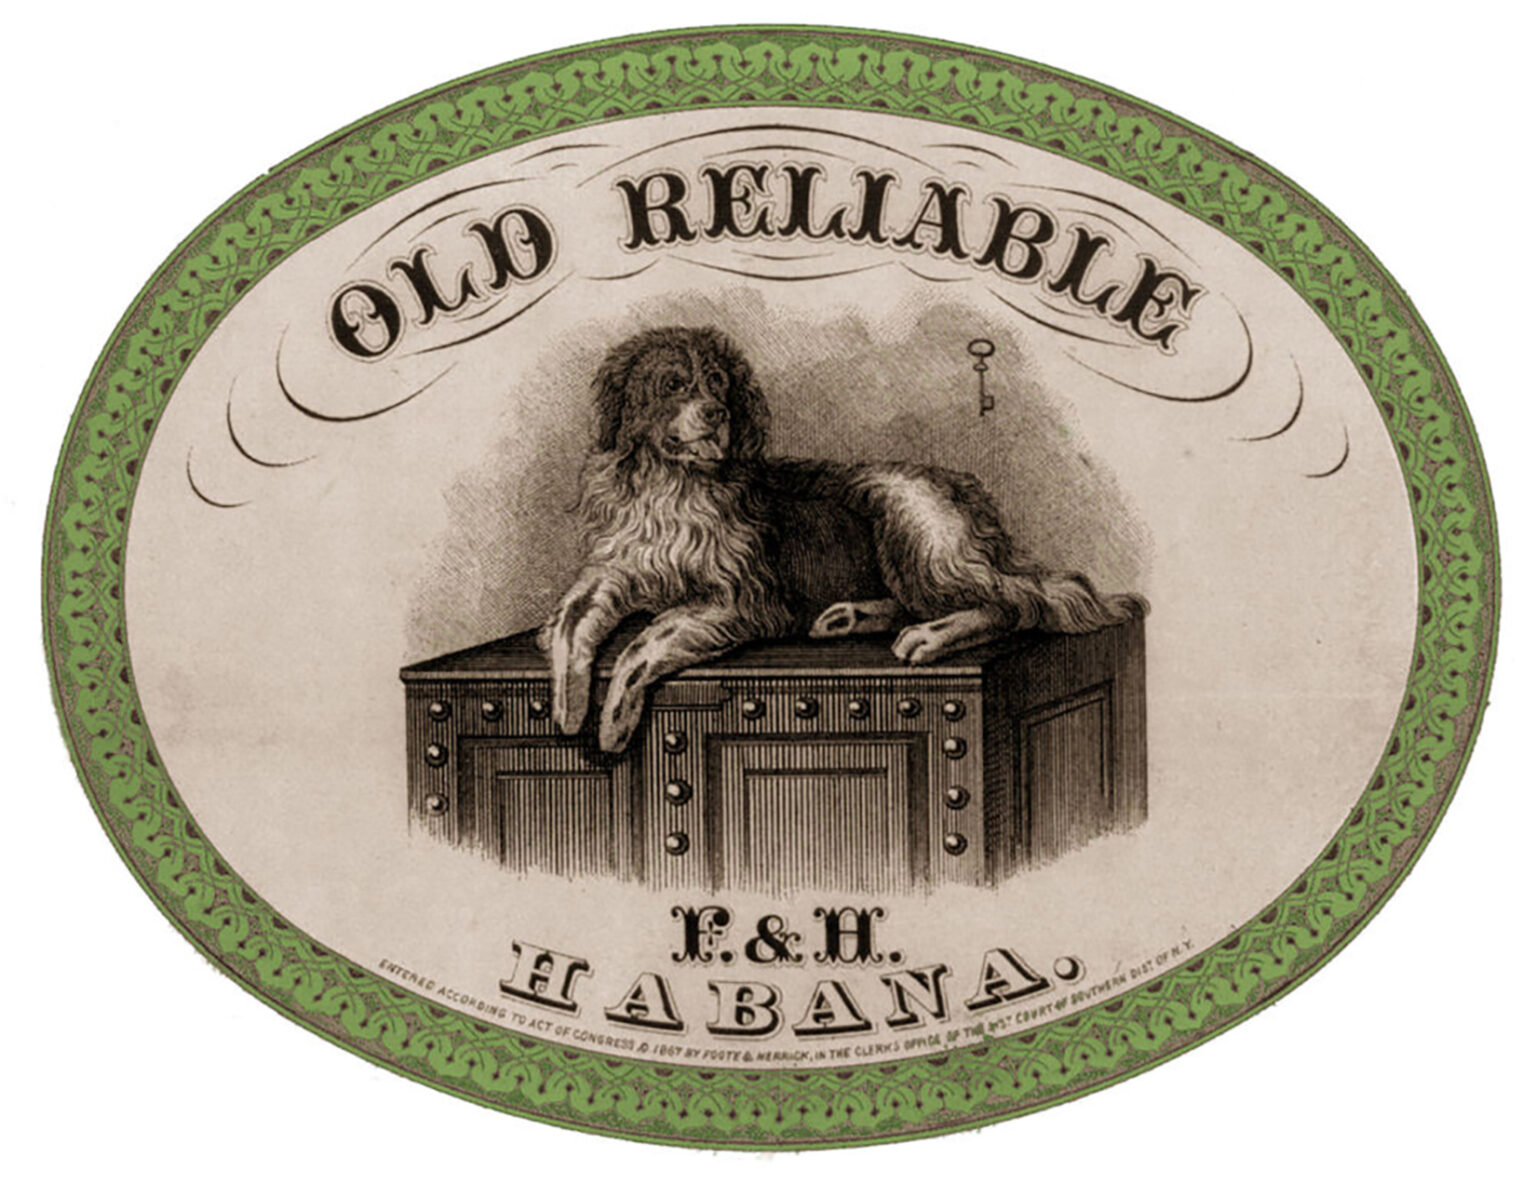 9 Cigar Box Label Images! - The Graphics Fairy